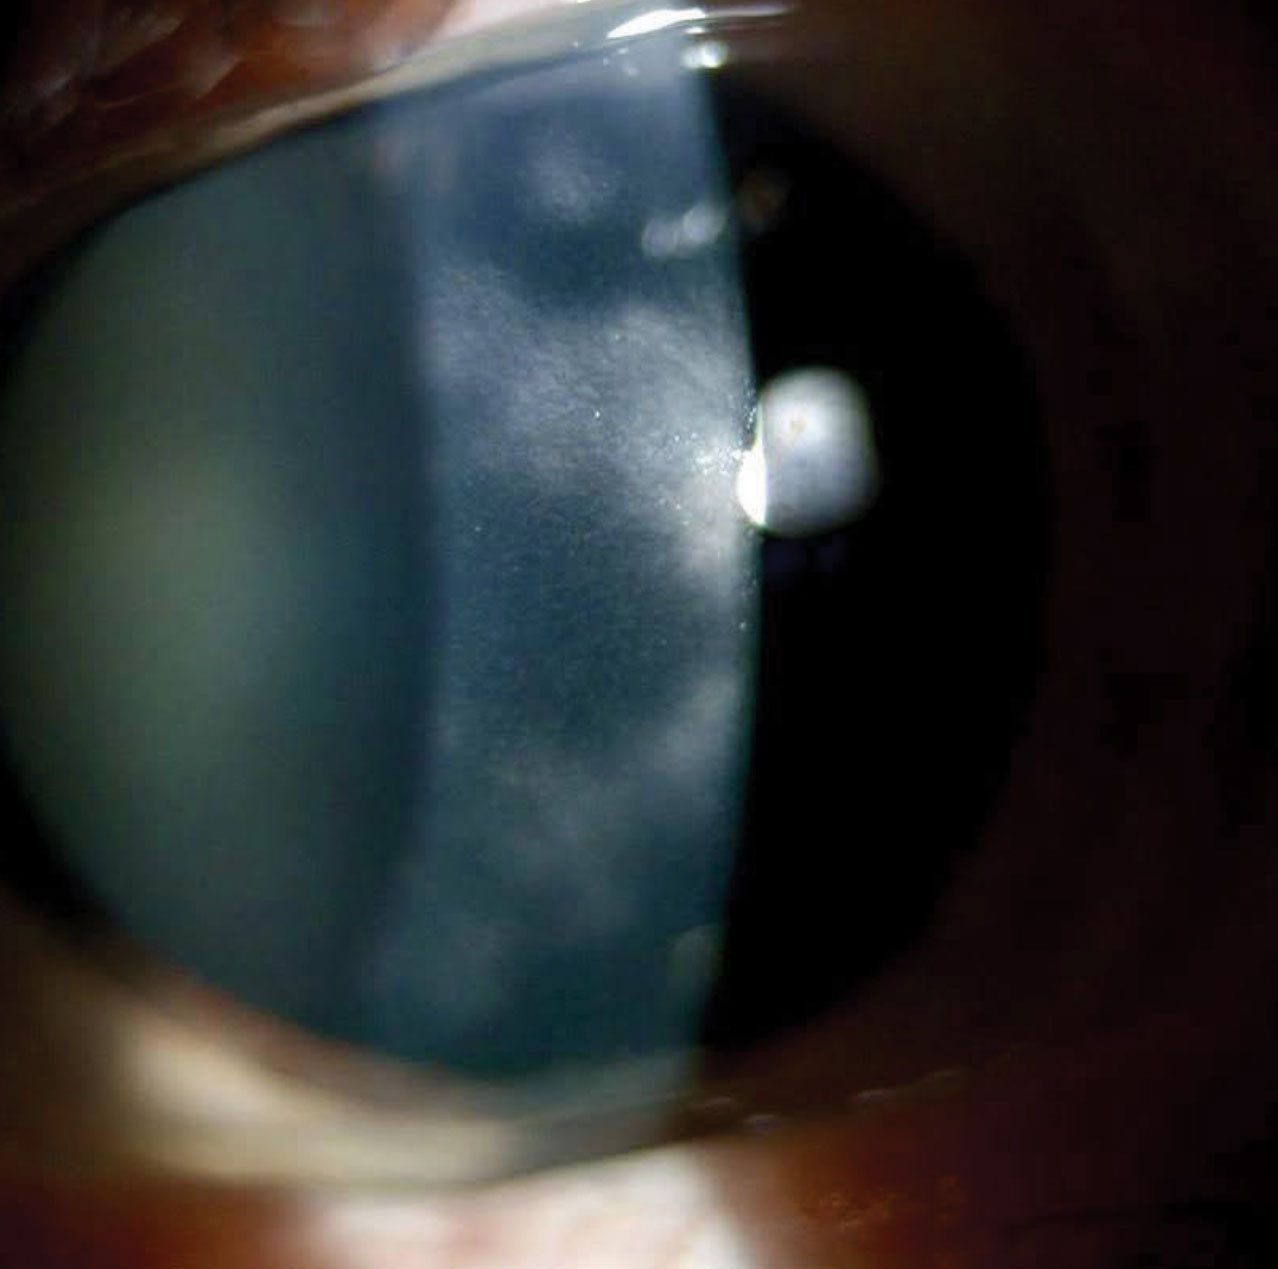 Case 1. This patient’s cornea showed diffuse patches of intrastromal haze.